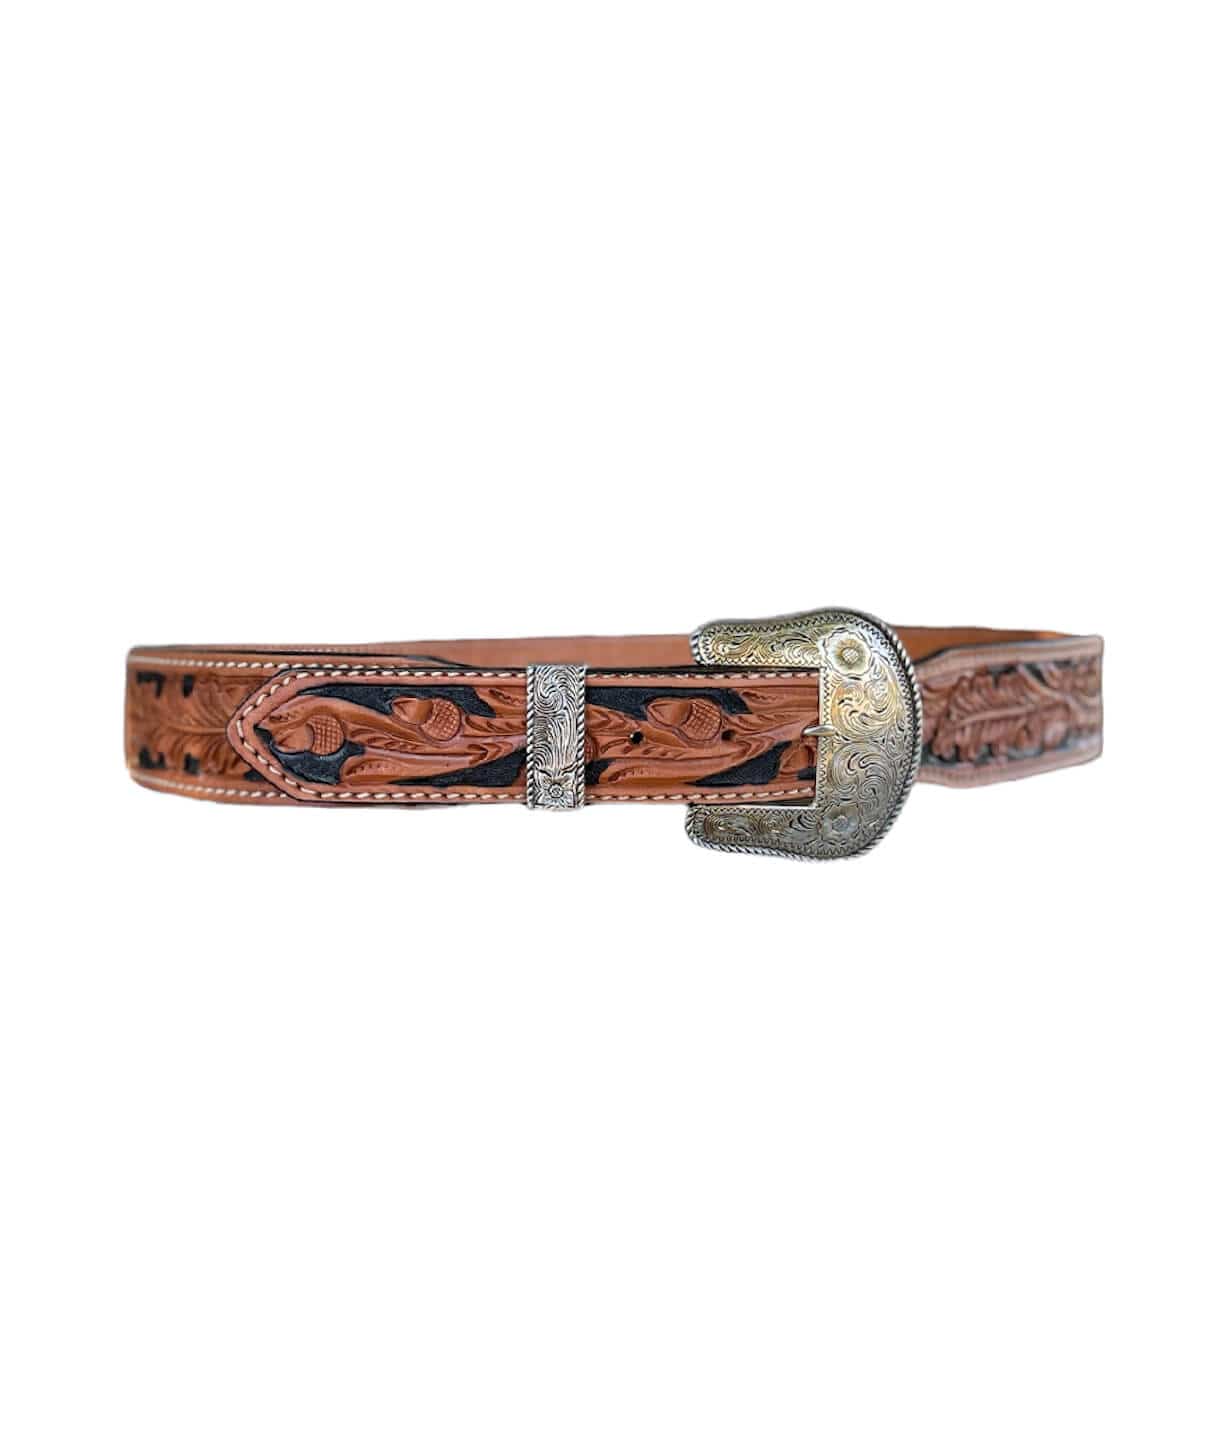 Alamo Saddlery Belts 1.75" tapered to 1.5" belt golden leather acorn tooling with background paint